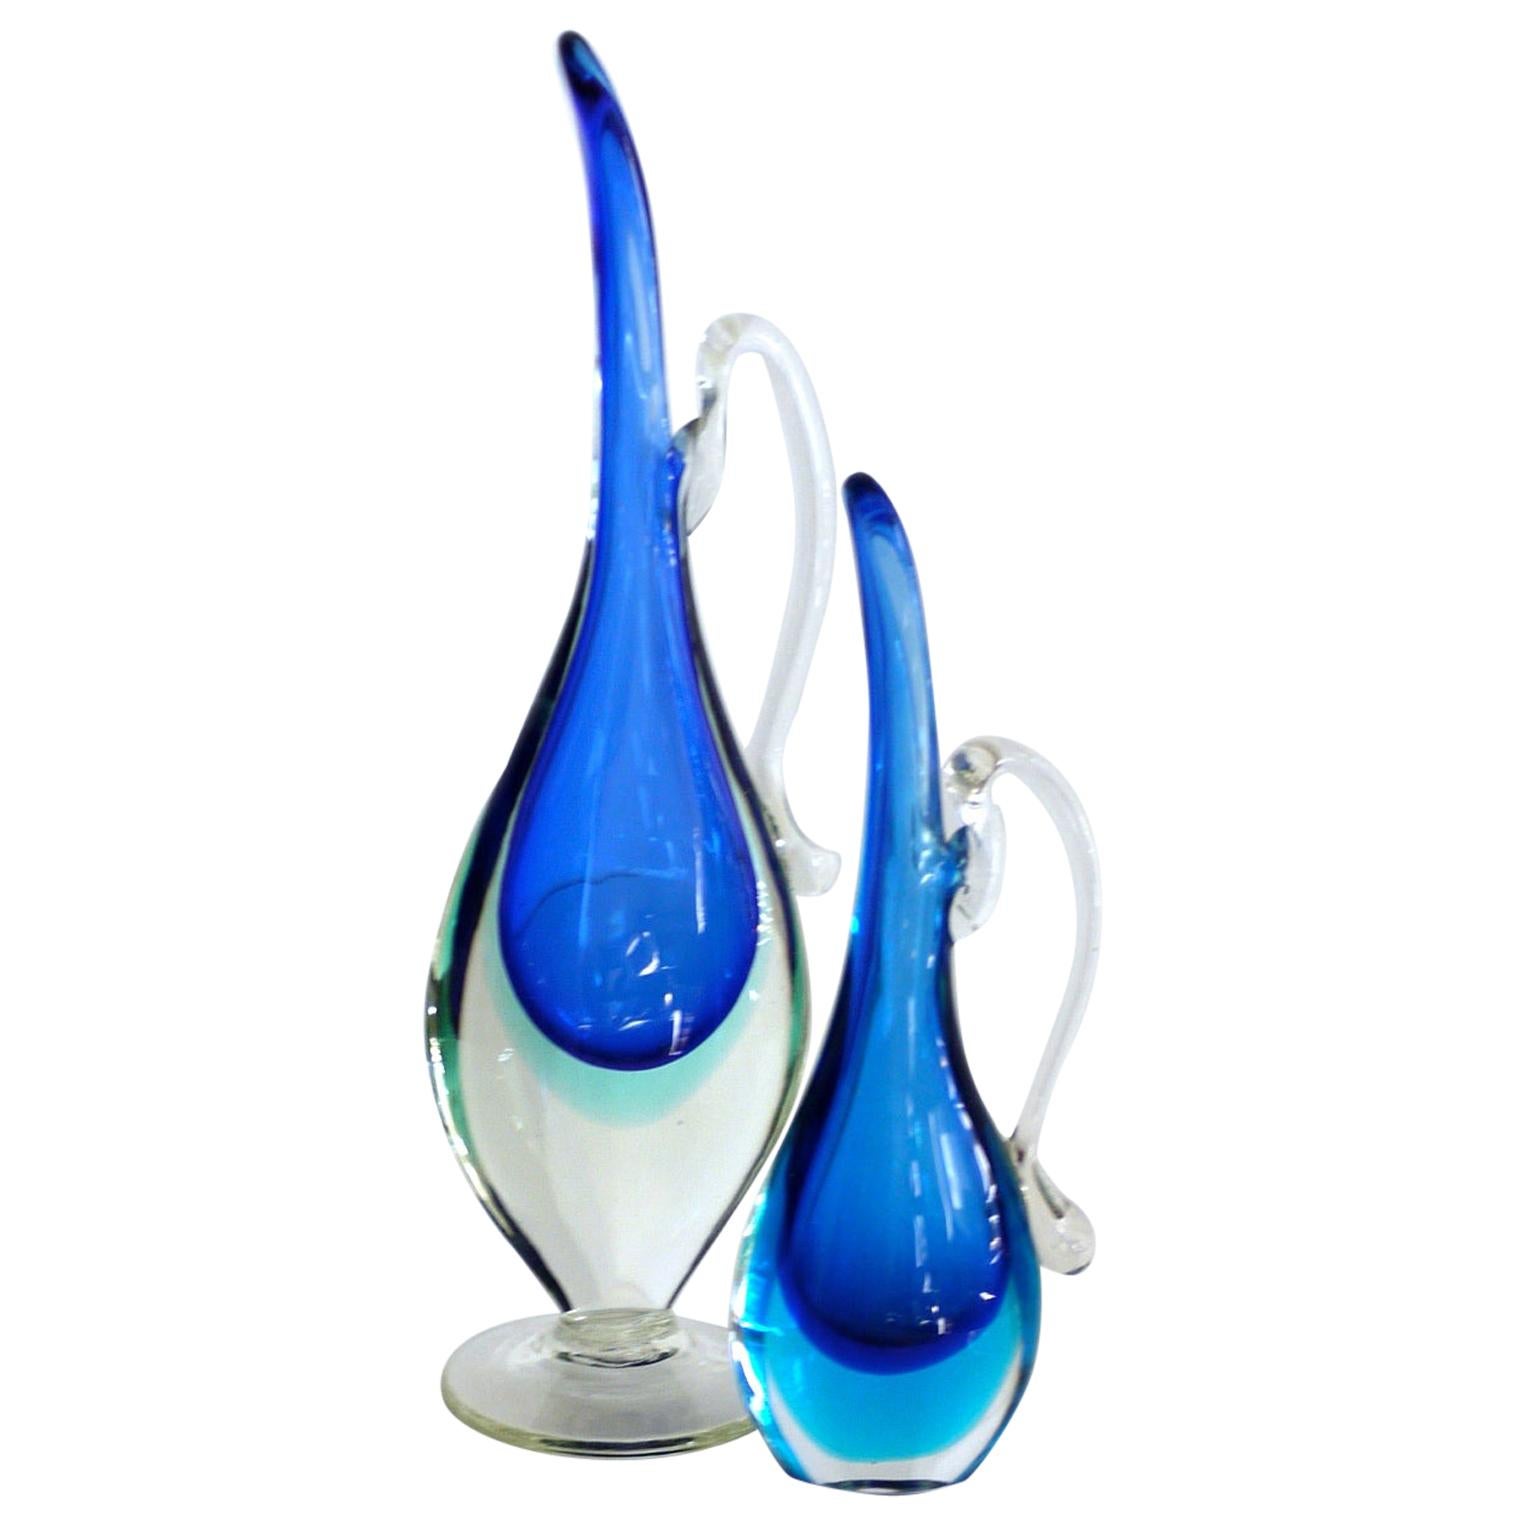 Pair of Murano Sommerso Glass Vases/Pitchers in Layered Shades of Blue, 1980s For Sale